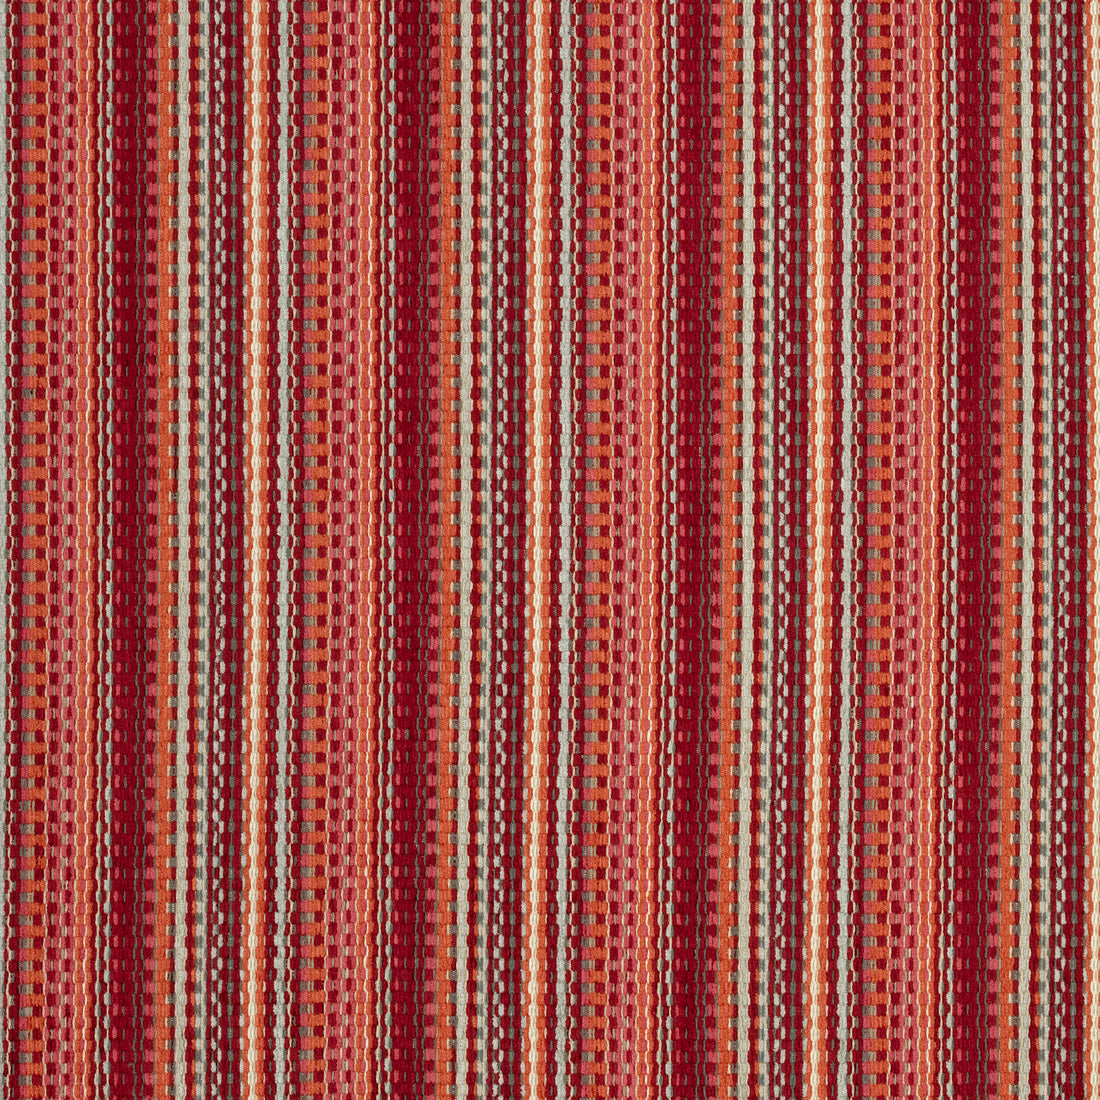 Kachina fabric in red color - pattern number W73356 - by Thibaut in the Nomad collection